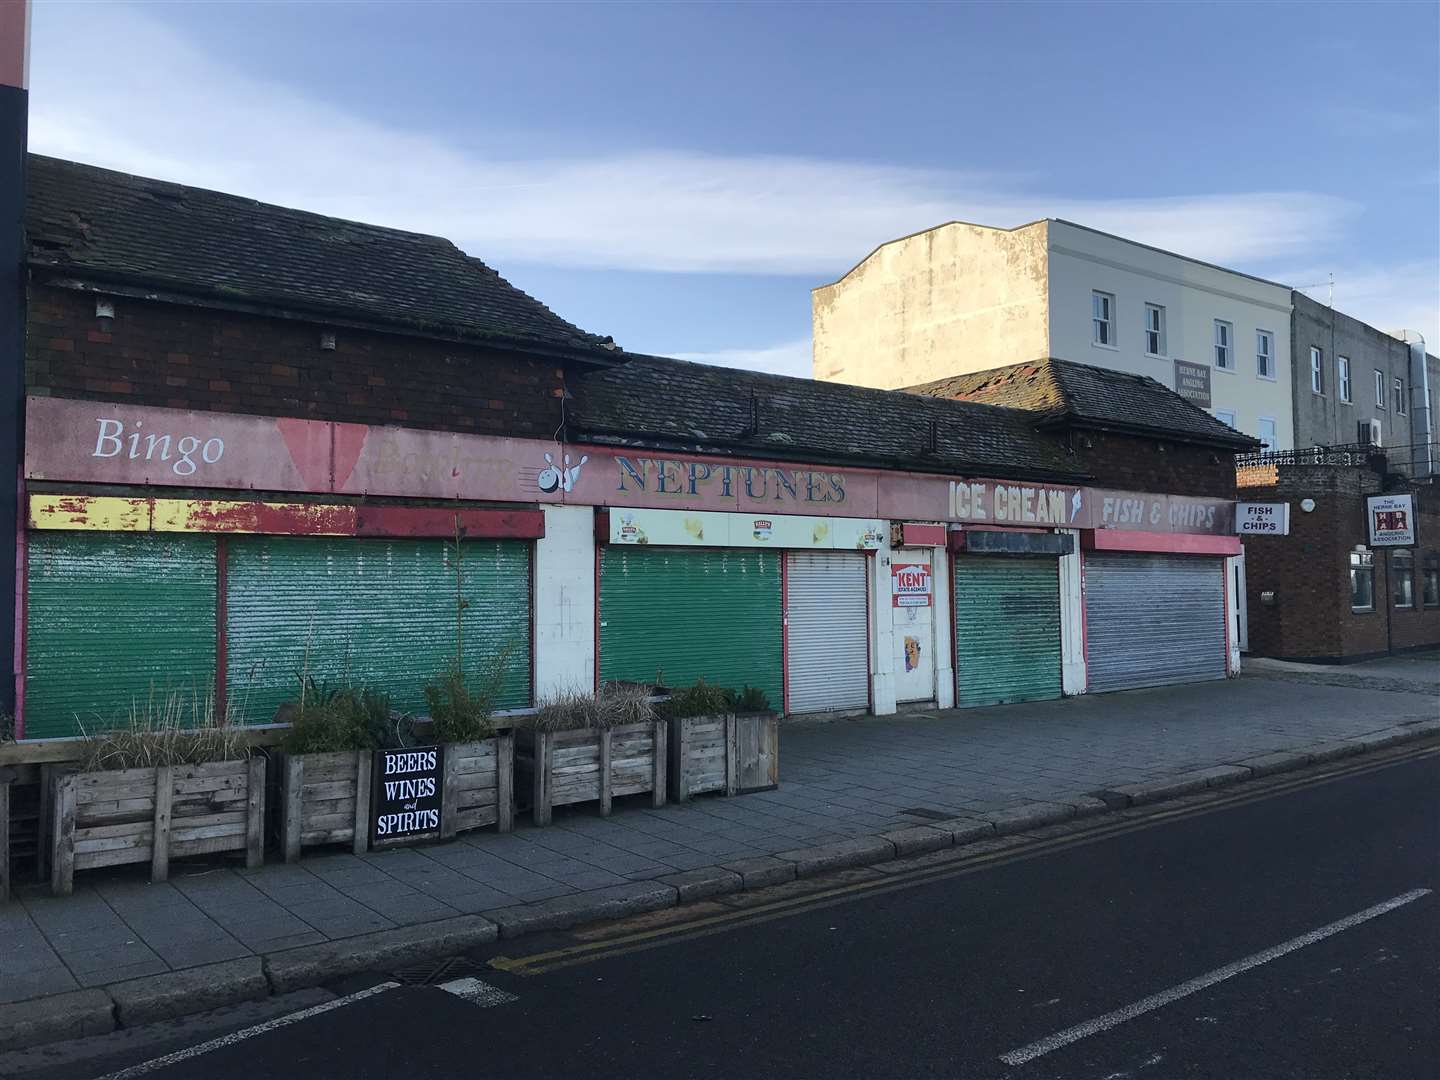 Mr Whiting expects the sale of the arcade trigger a wave of developments along the seafront